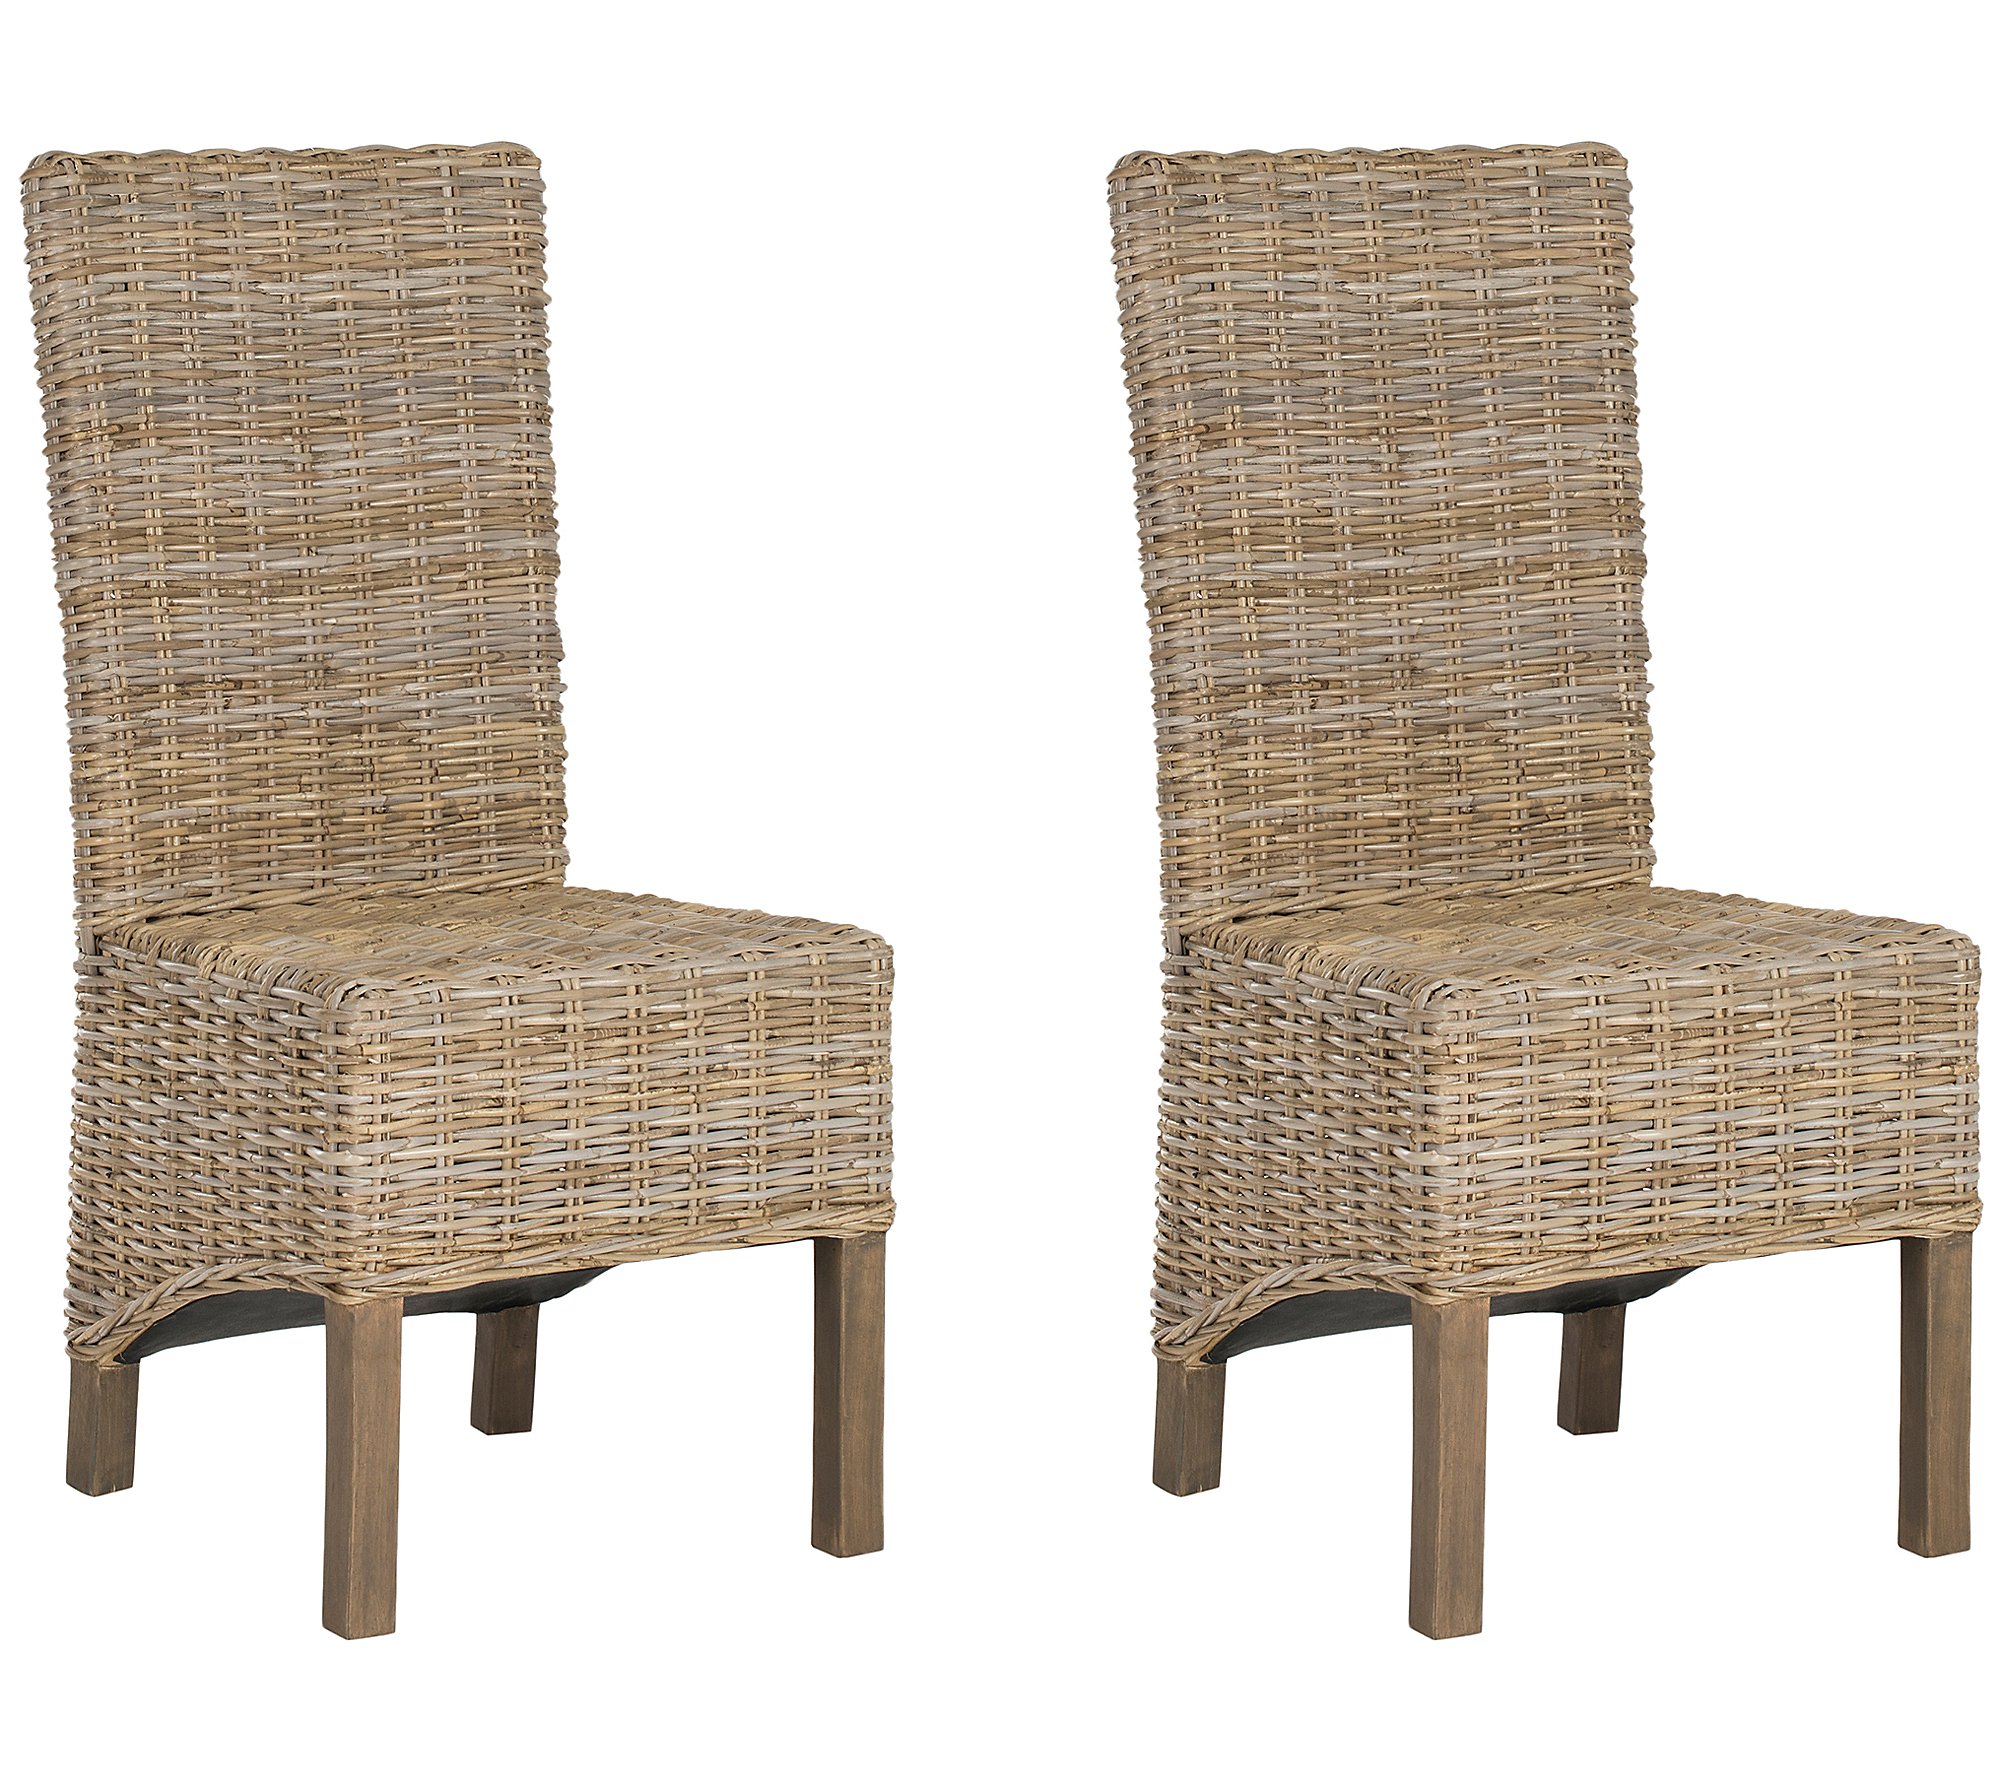 Safavieh Pembrooke Side Chair (Set of 2 chairs)